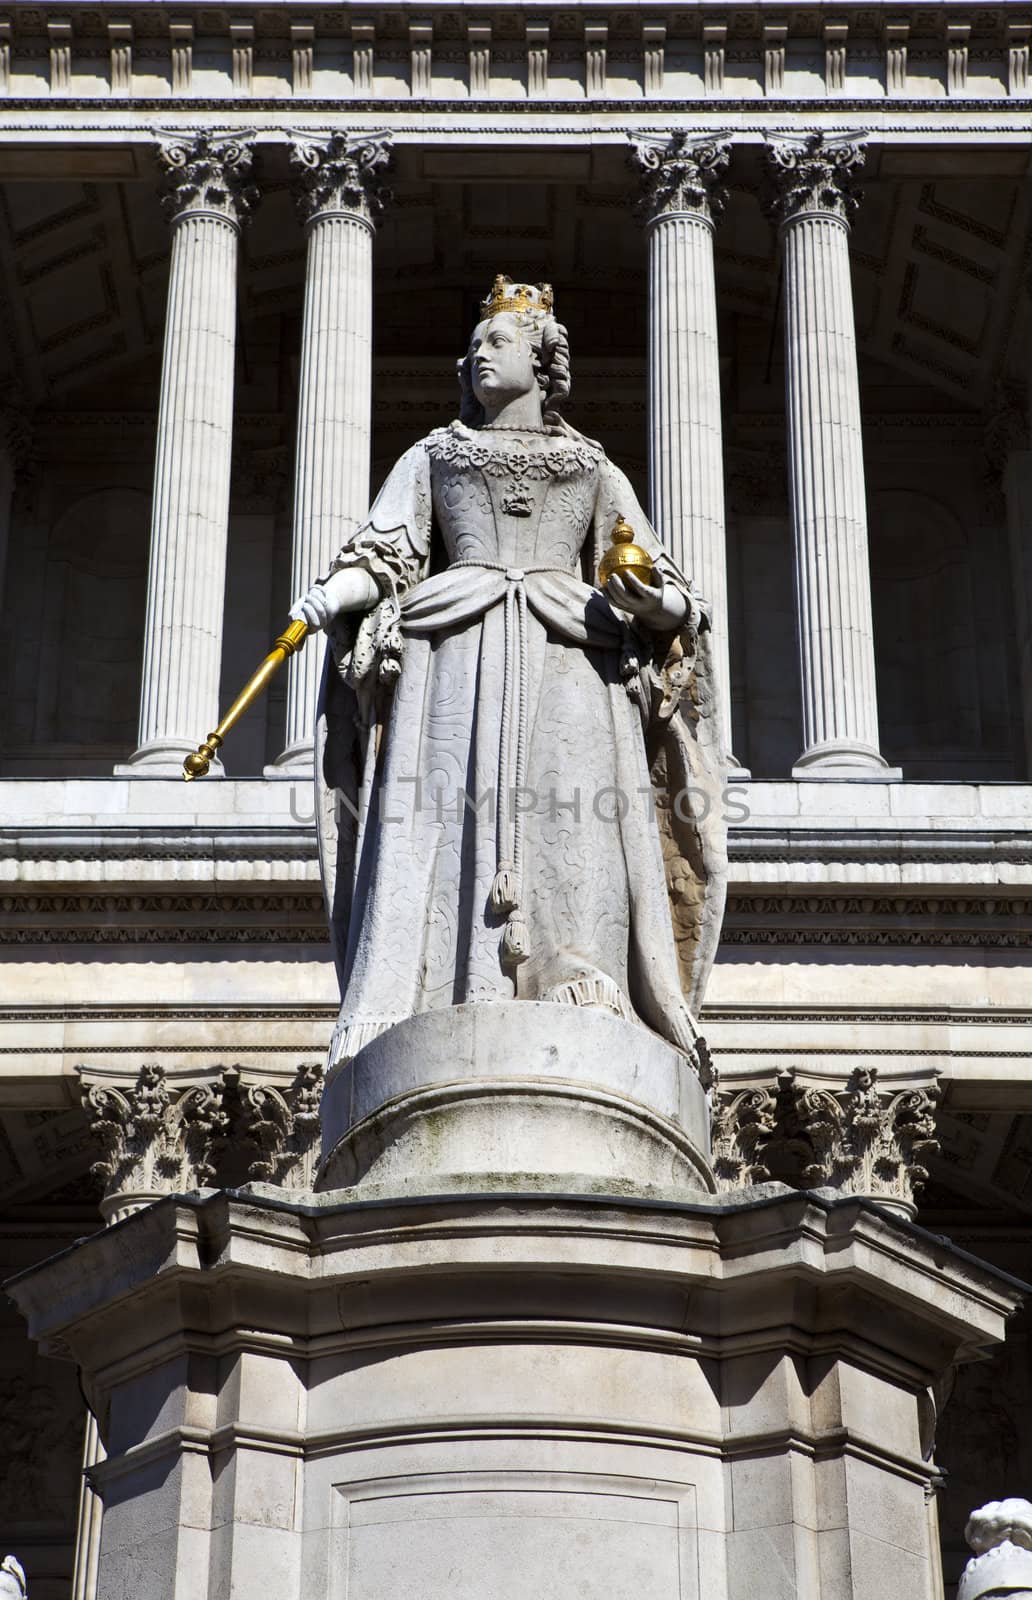 The Queen Anne Statue situated infront of St. Paul's Cathedral in London.